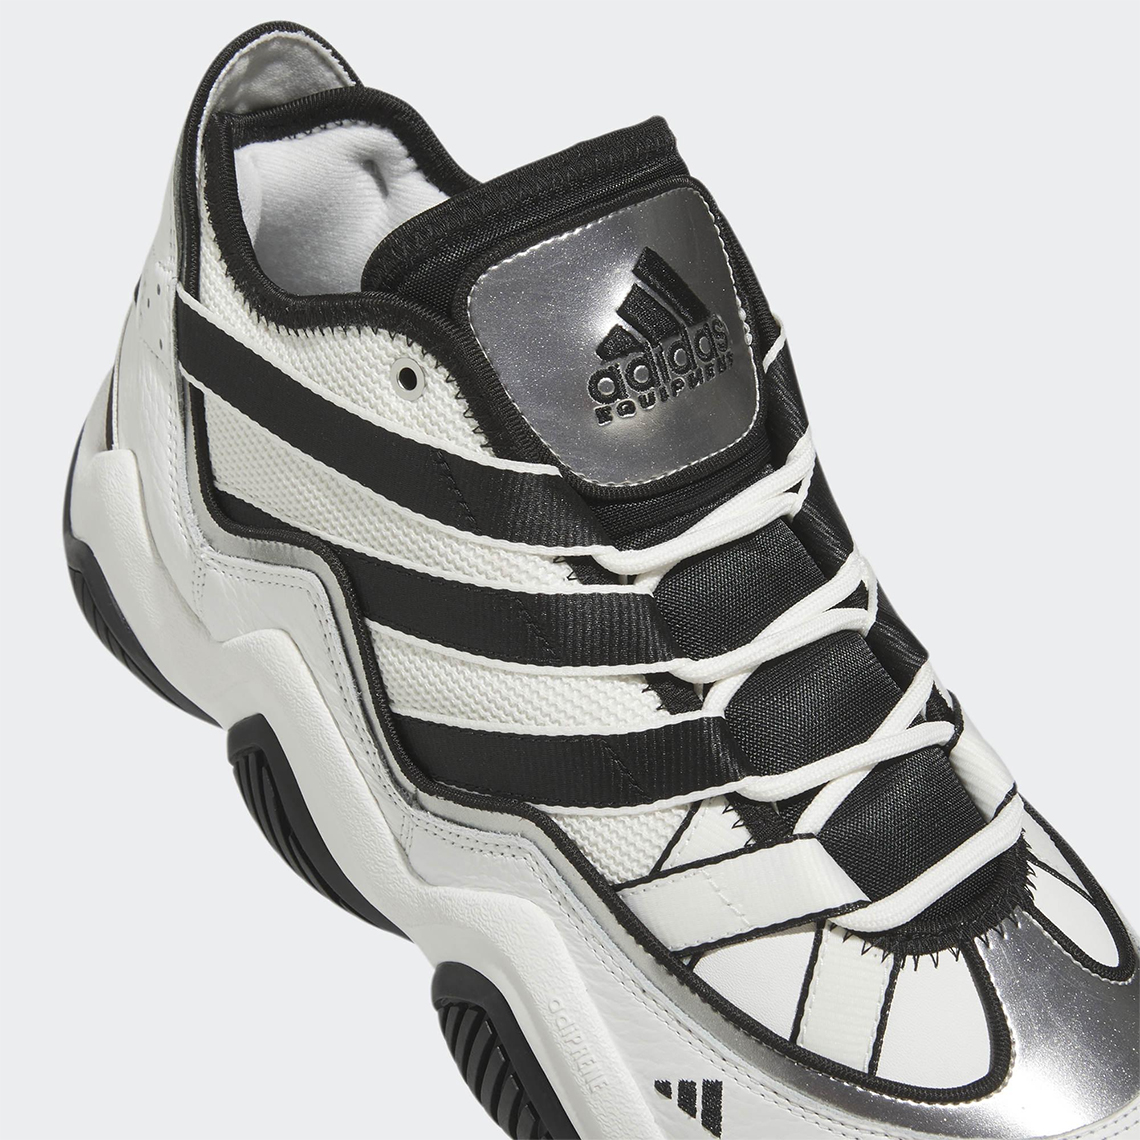 adidas mirra shoes sale Release Date | Musee-jacquemart-andreShops ...